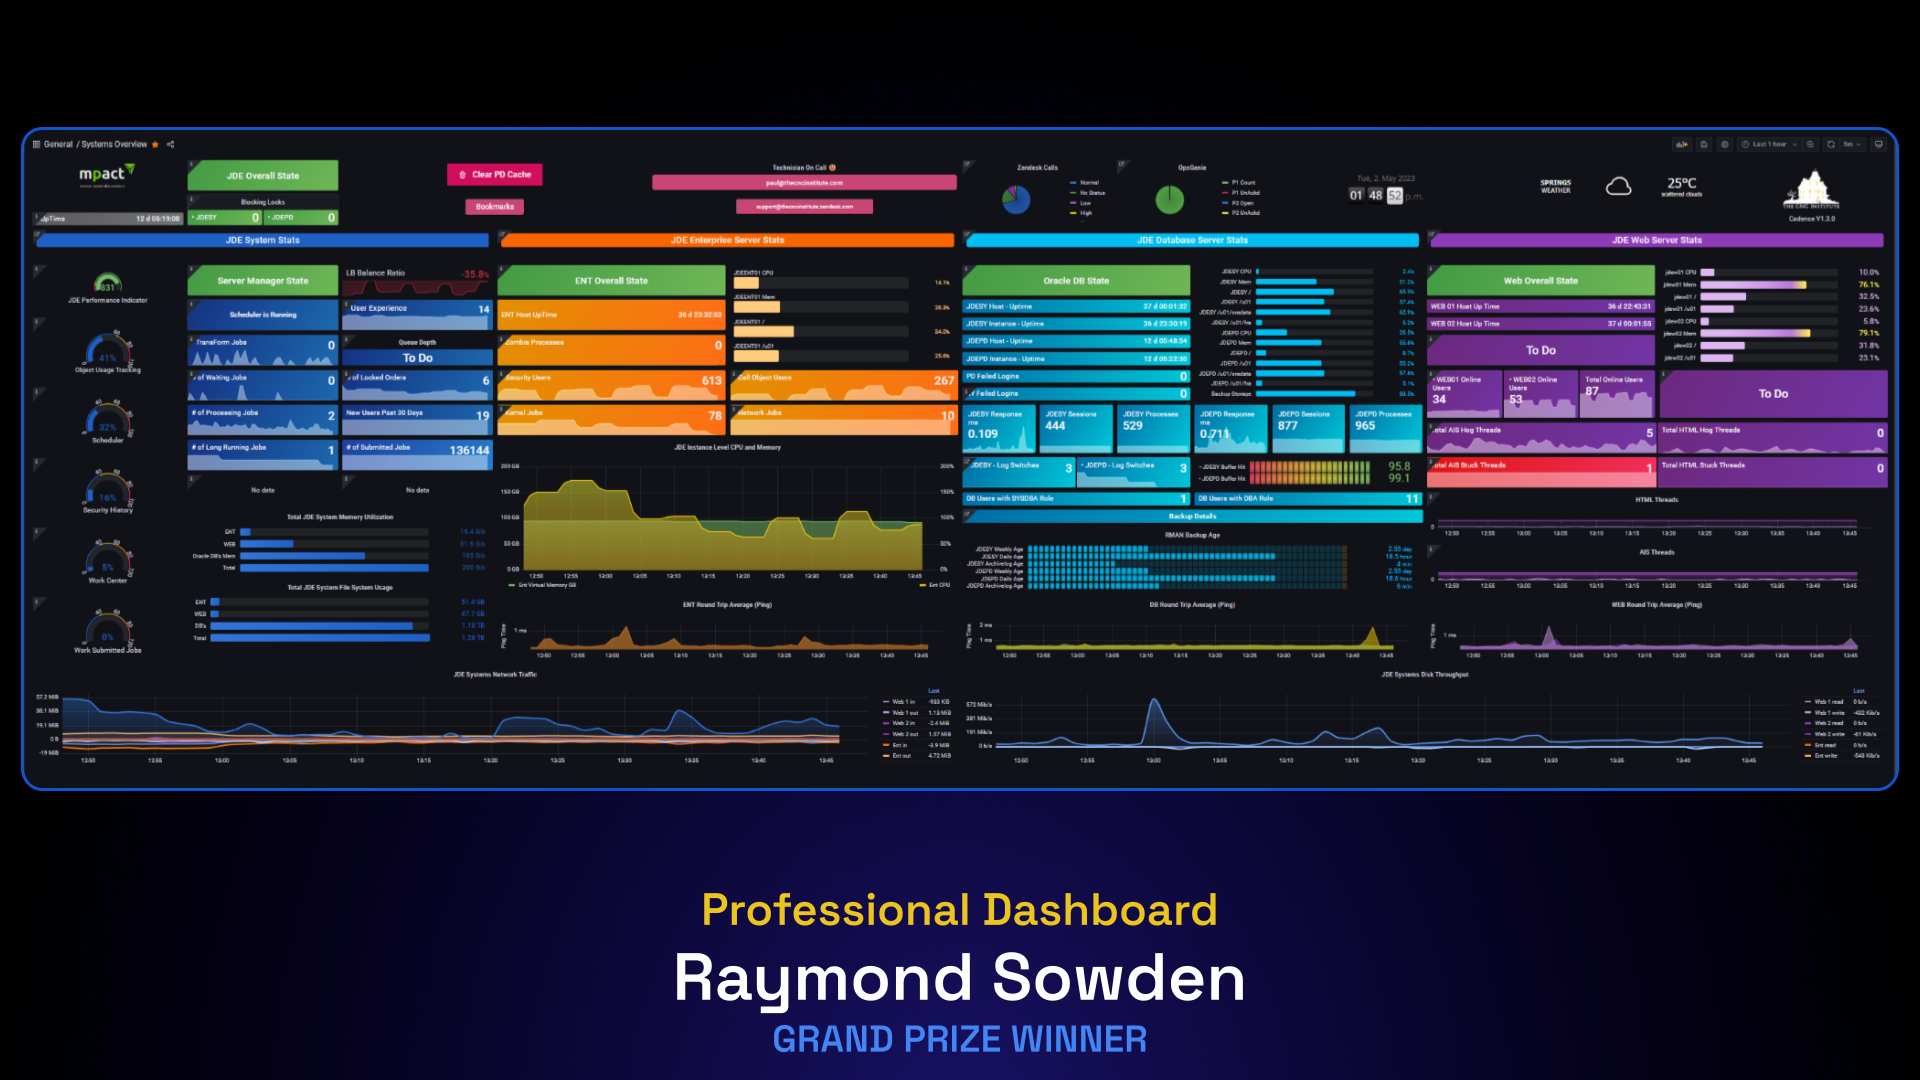 Presentation slide showing Golden Grots winning dashboard in professional category and name of winner. 